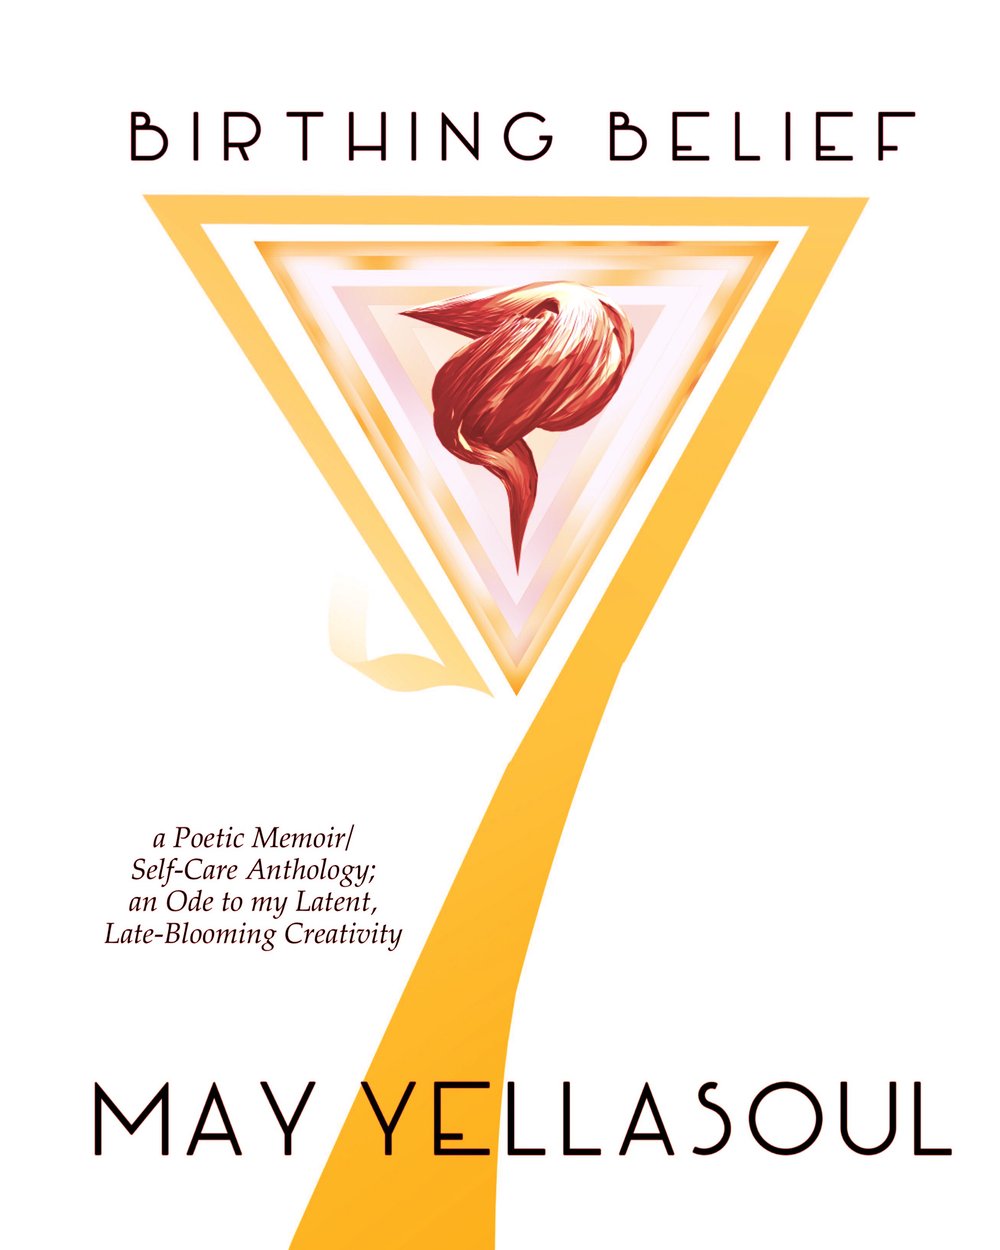 Image of "Birthing Belief" Poetry Book by May YellaSoul